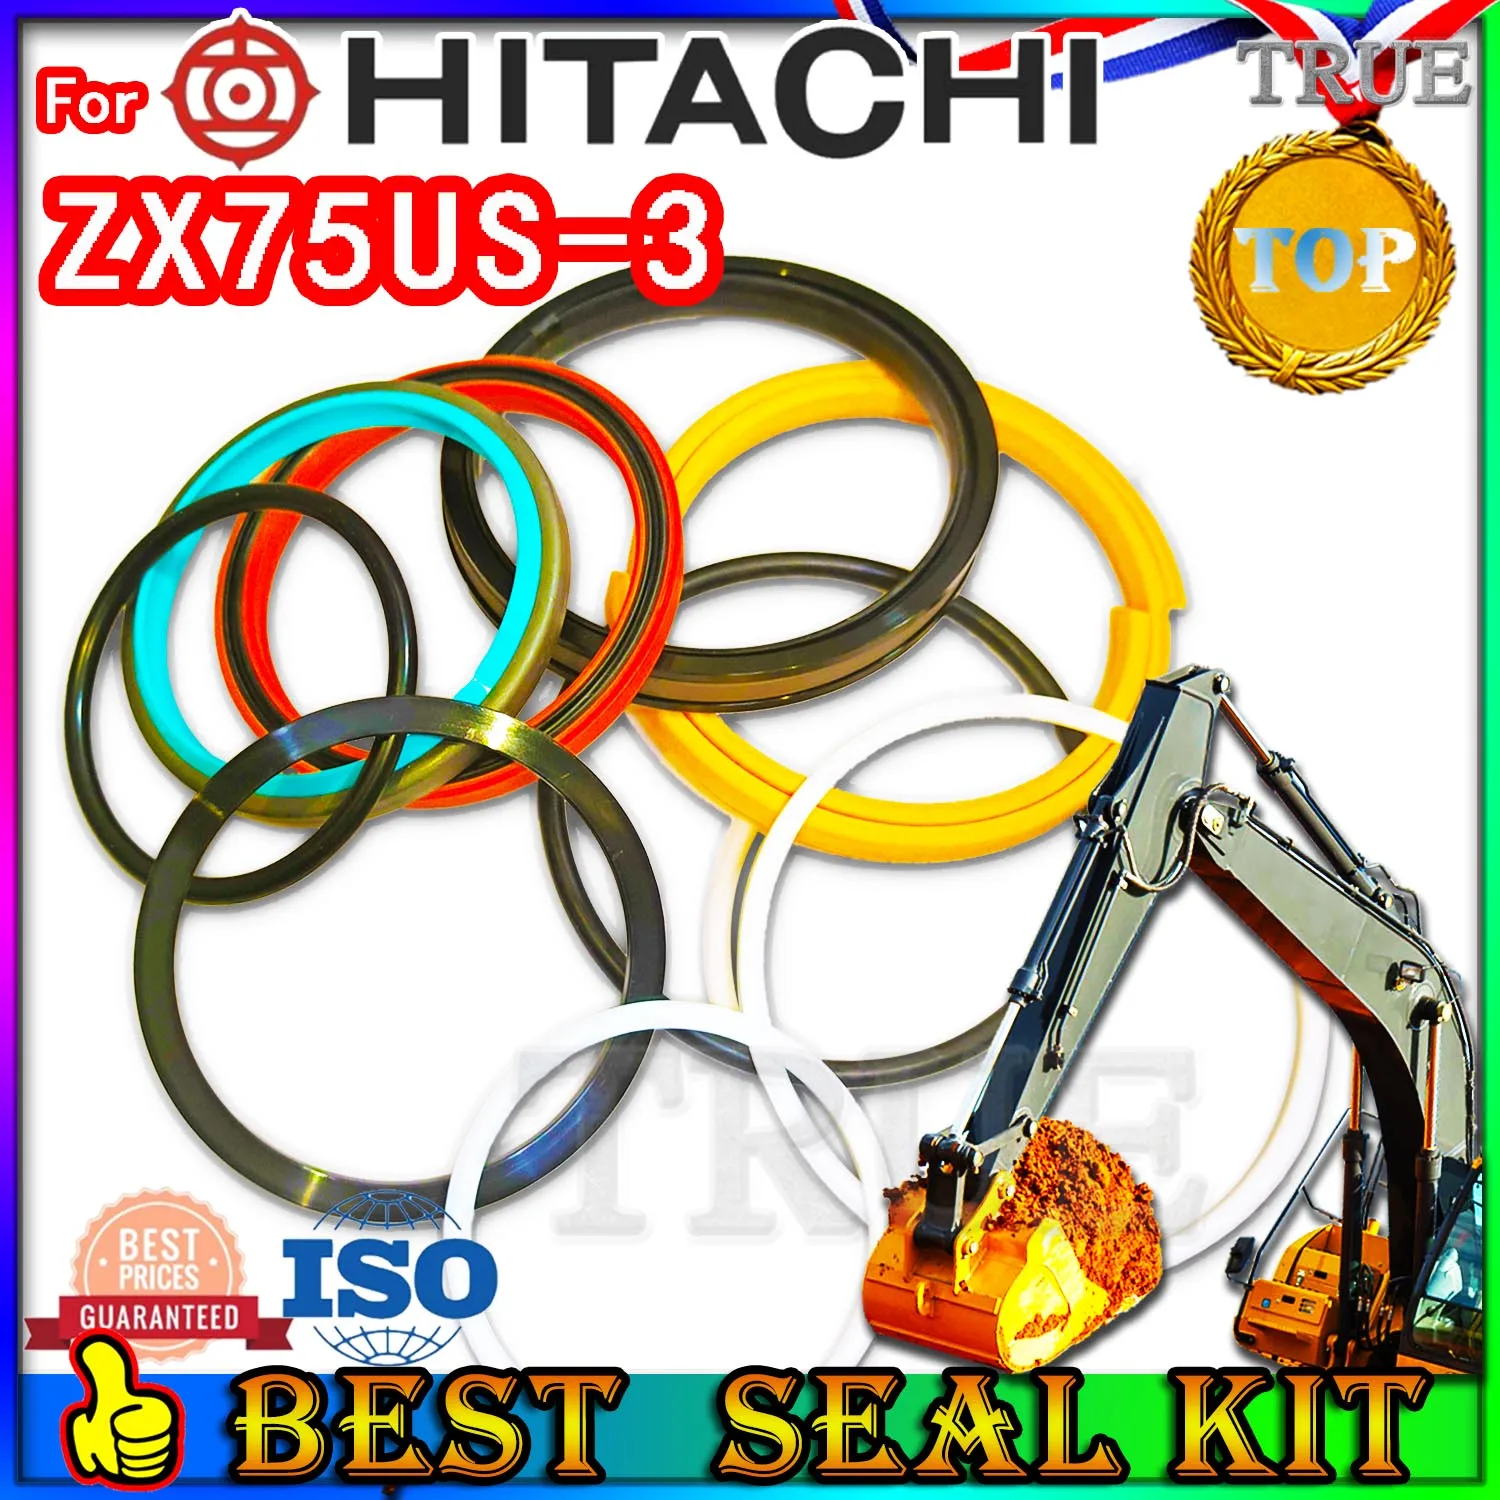 

For Hitachi ZX75US-3 Oil Seal Repair Kit Boom Arm Bucket Excavator Hydraulic Cylinder Hit ZX75US 3 Best Reliable Mend proof Foot